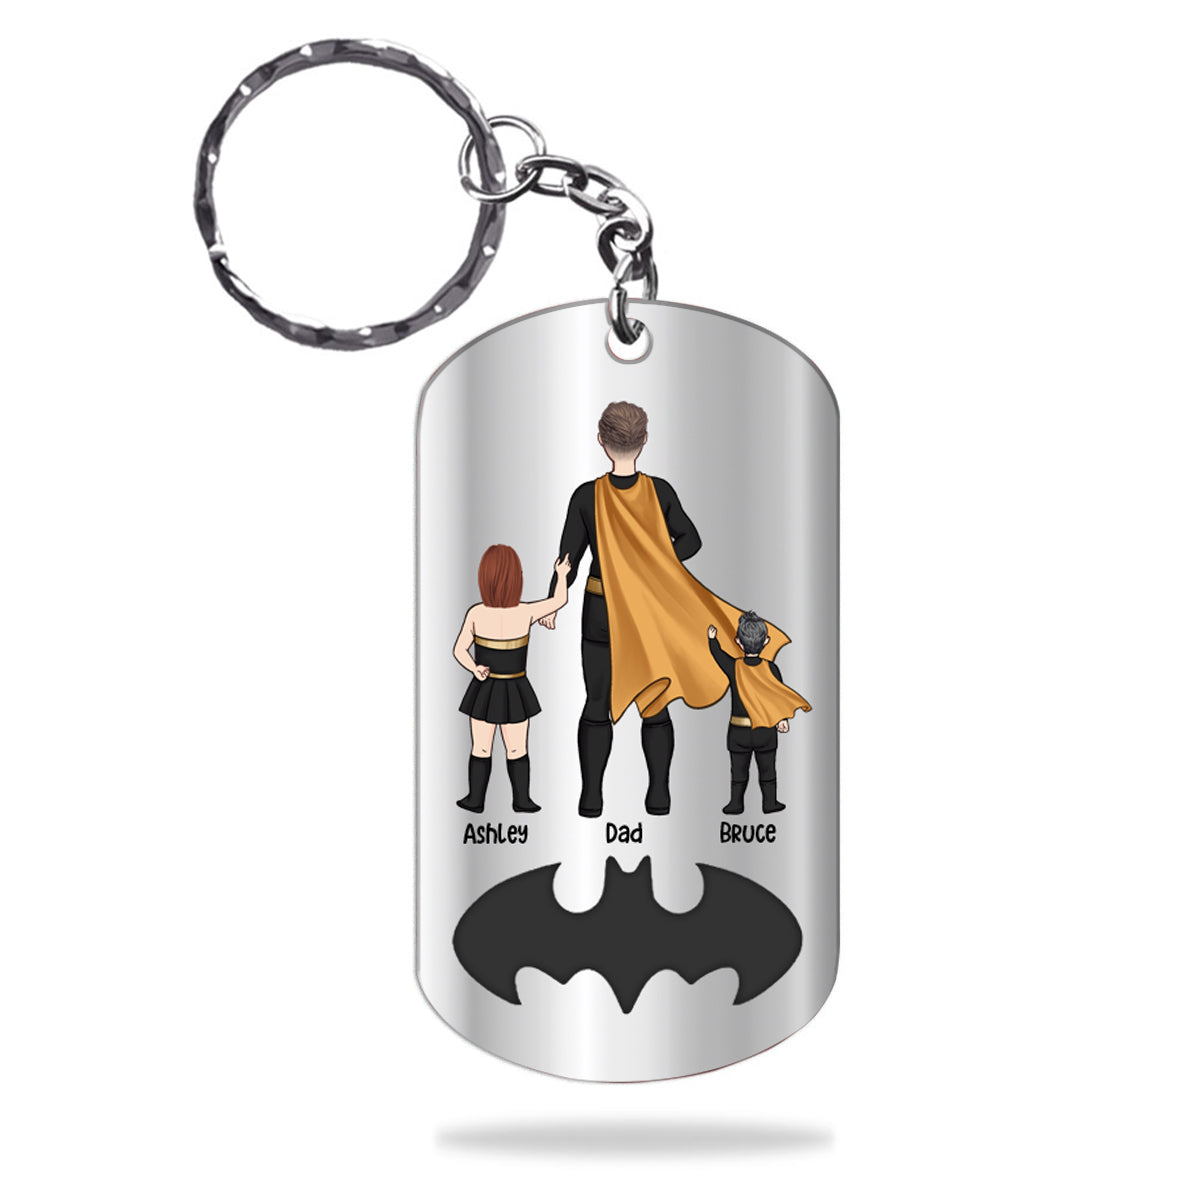 Disover Dad To Us You Are Superhero - Personalized Father Stainless Steel Keychain